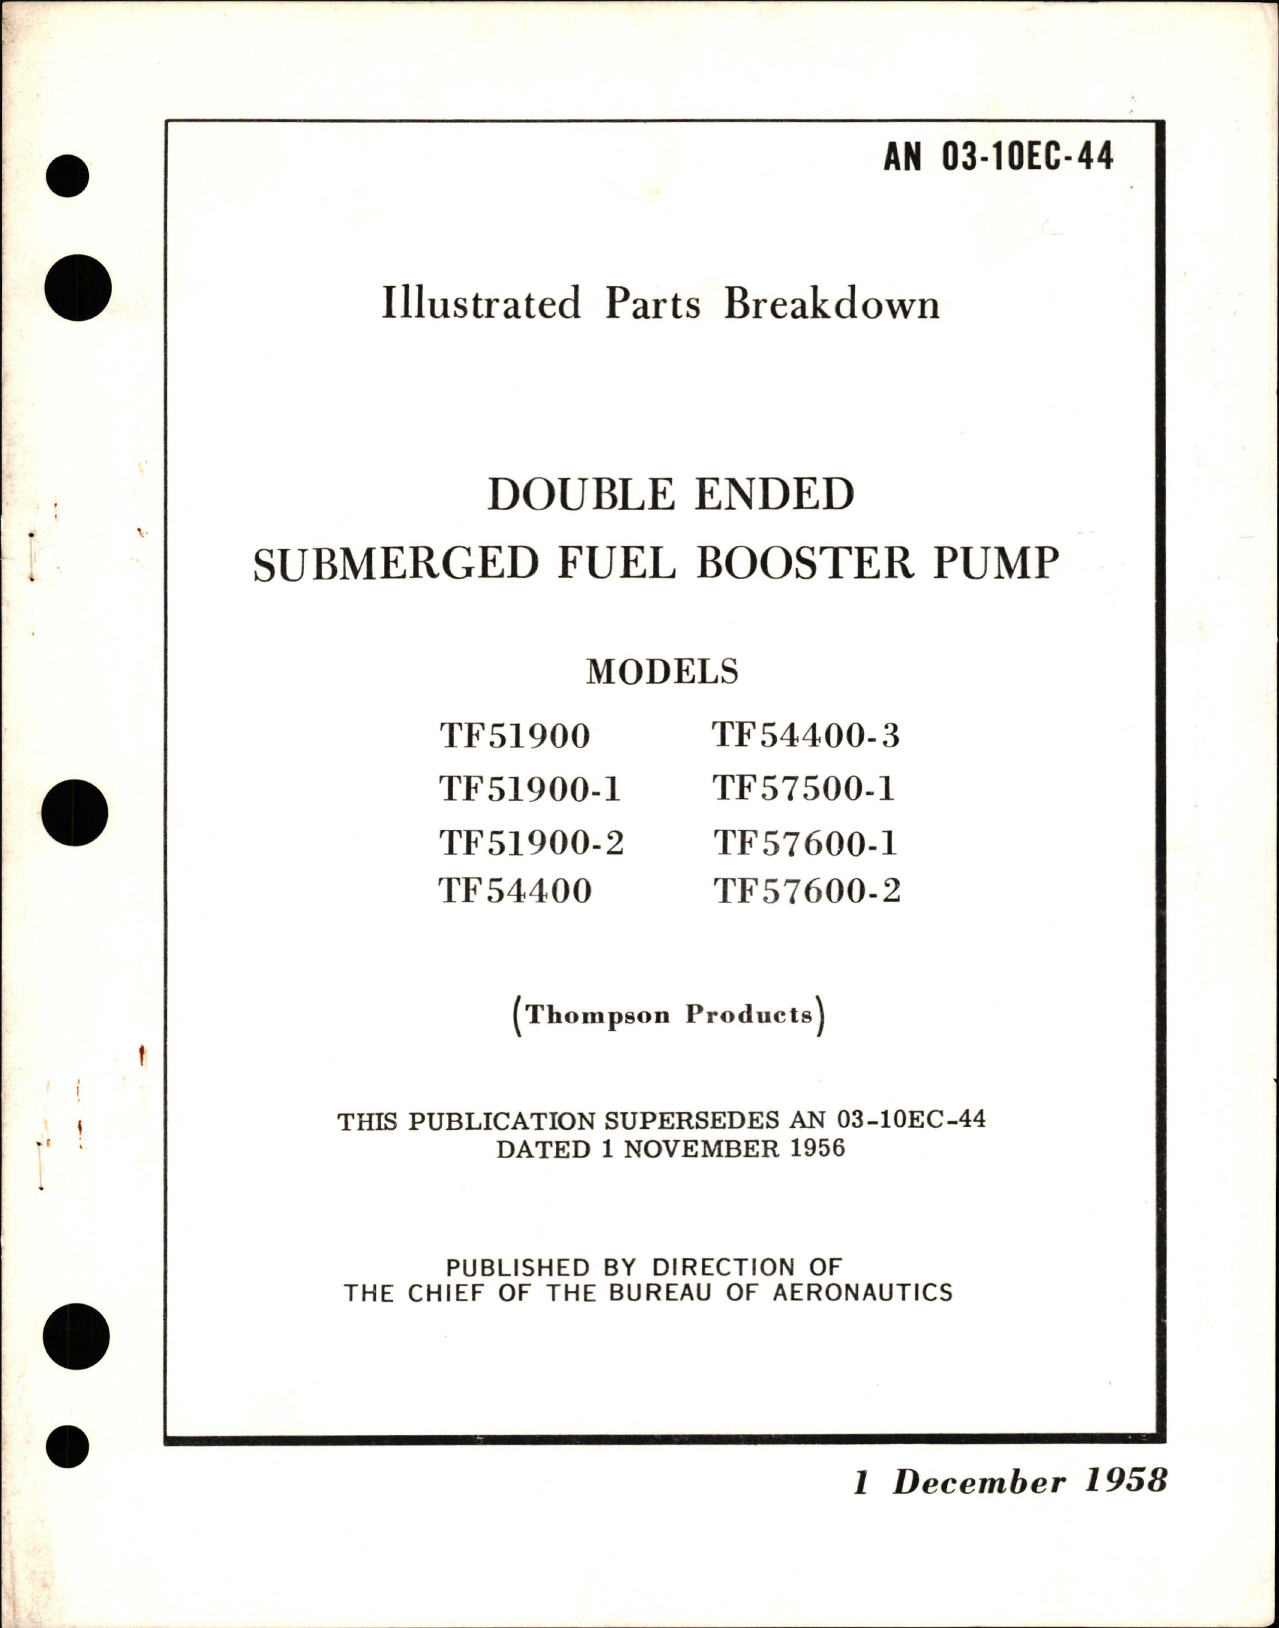 Sample page 1 from AirCorps Library document: Illustrated Parts Breakdown for Double Ended Submerged Fuel Booster Pump